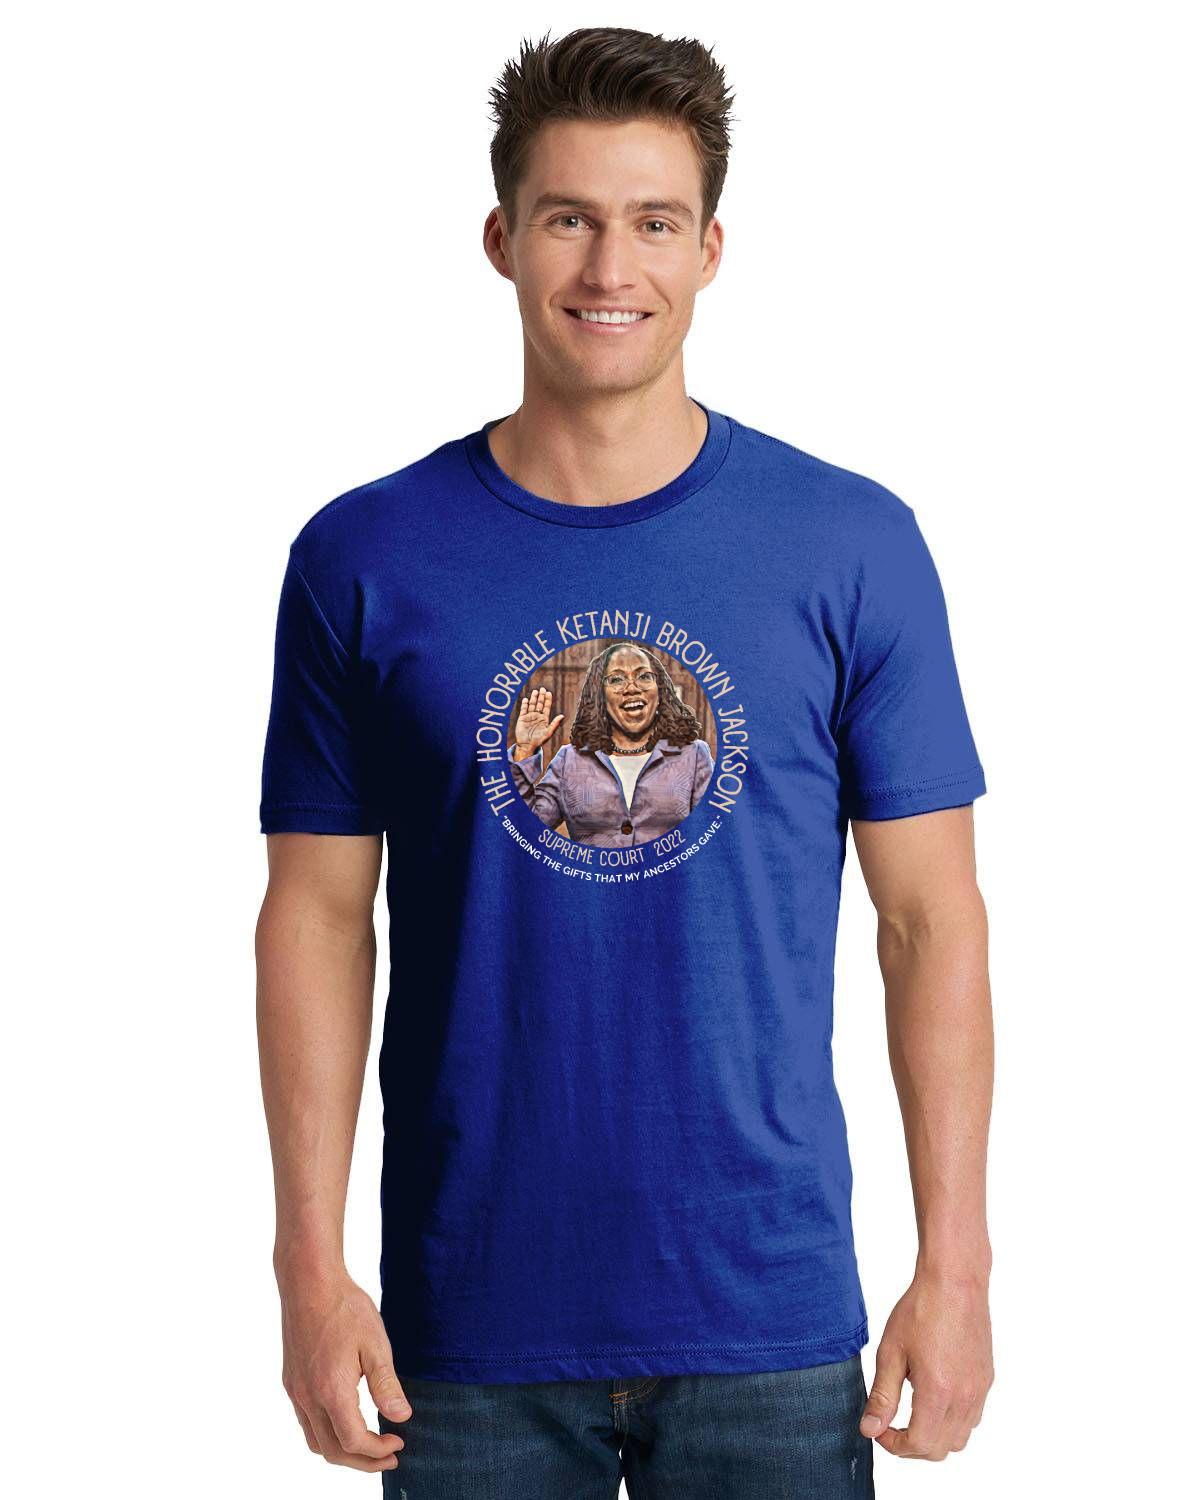 Celebrate Black Excellence with our Ketanji Brown T-Shirt - Supporting Healing Justice SB!